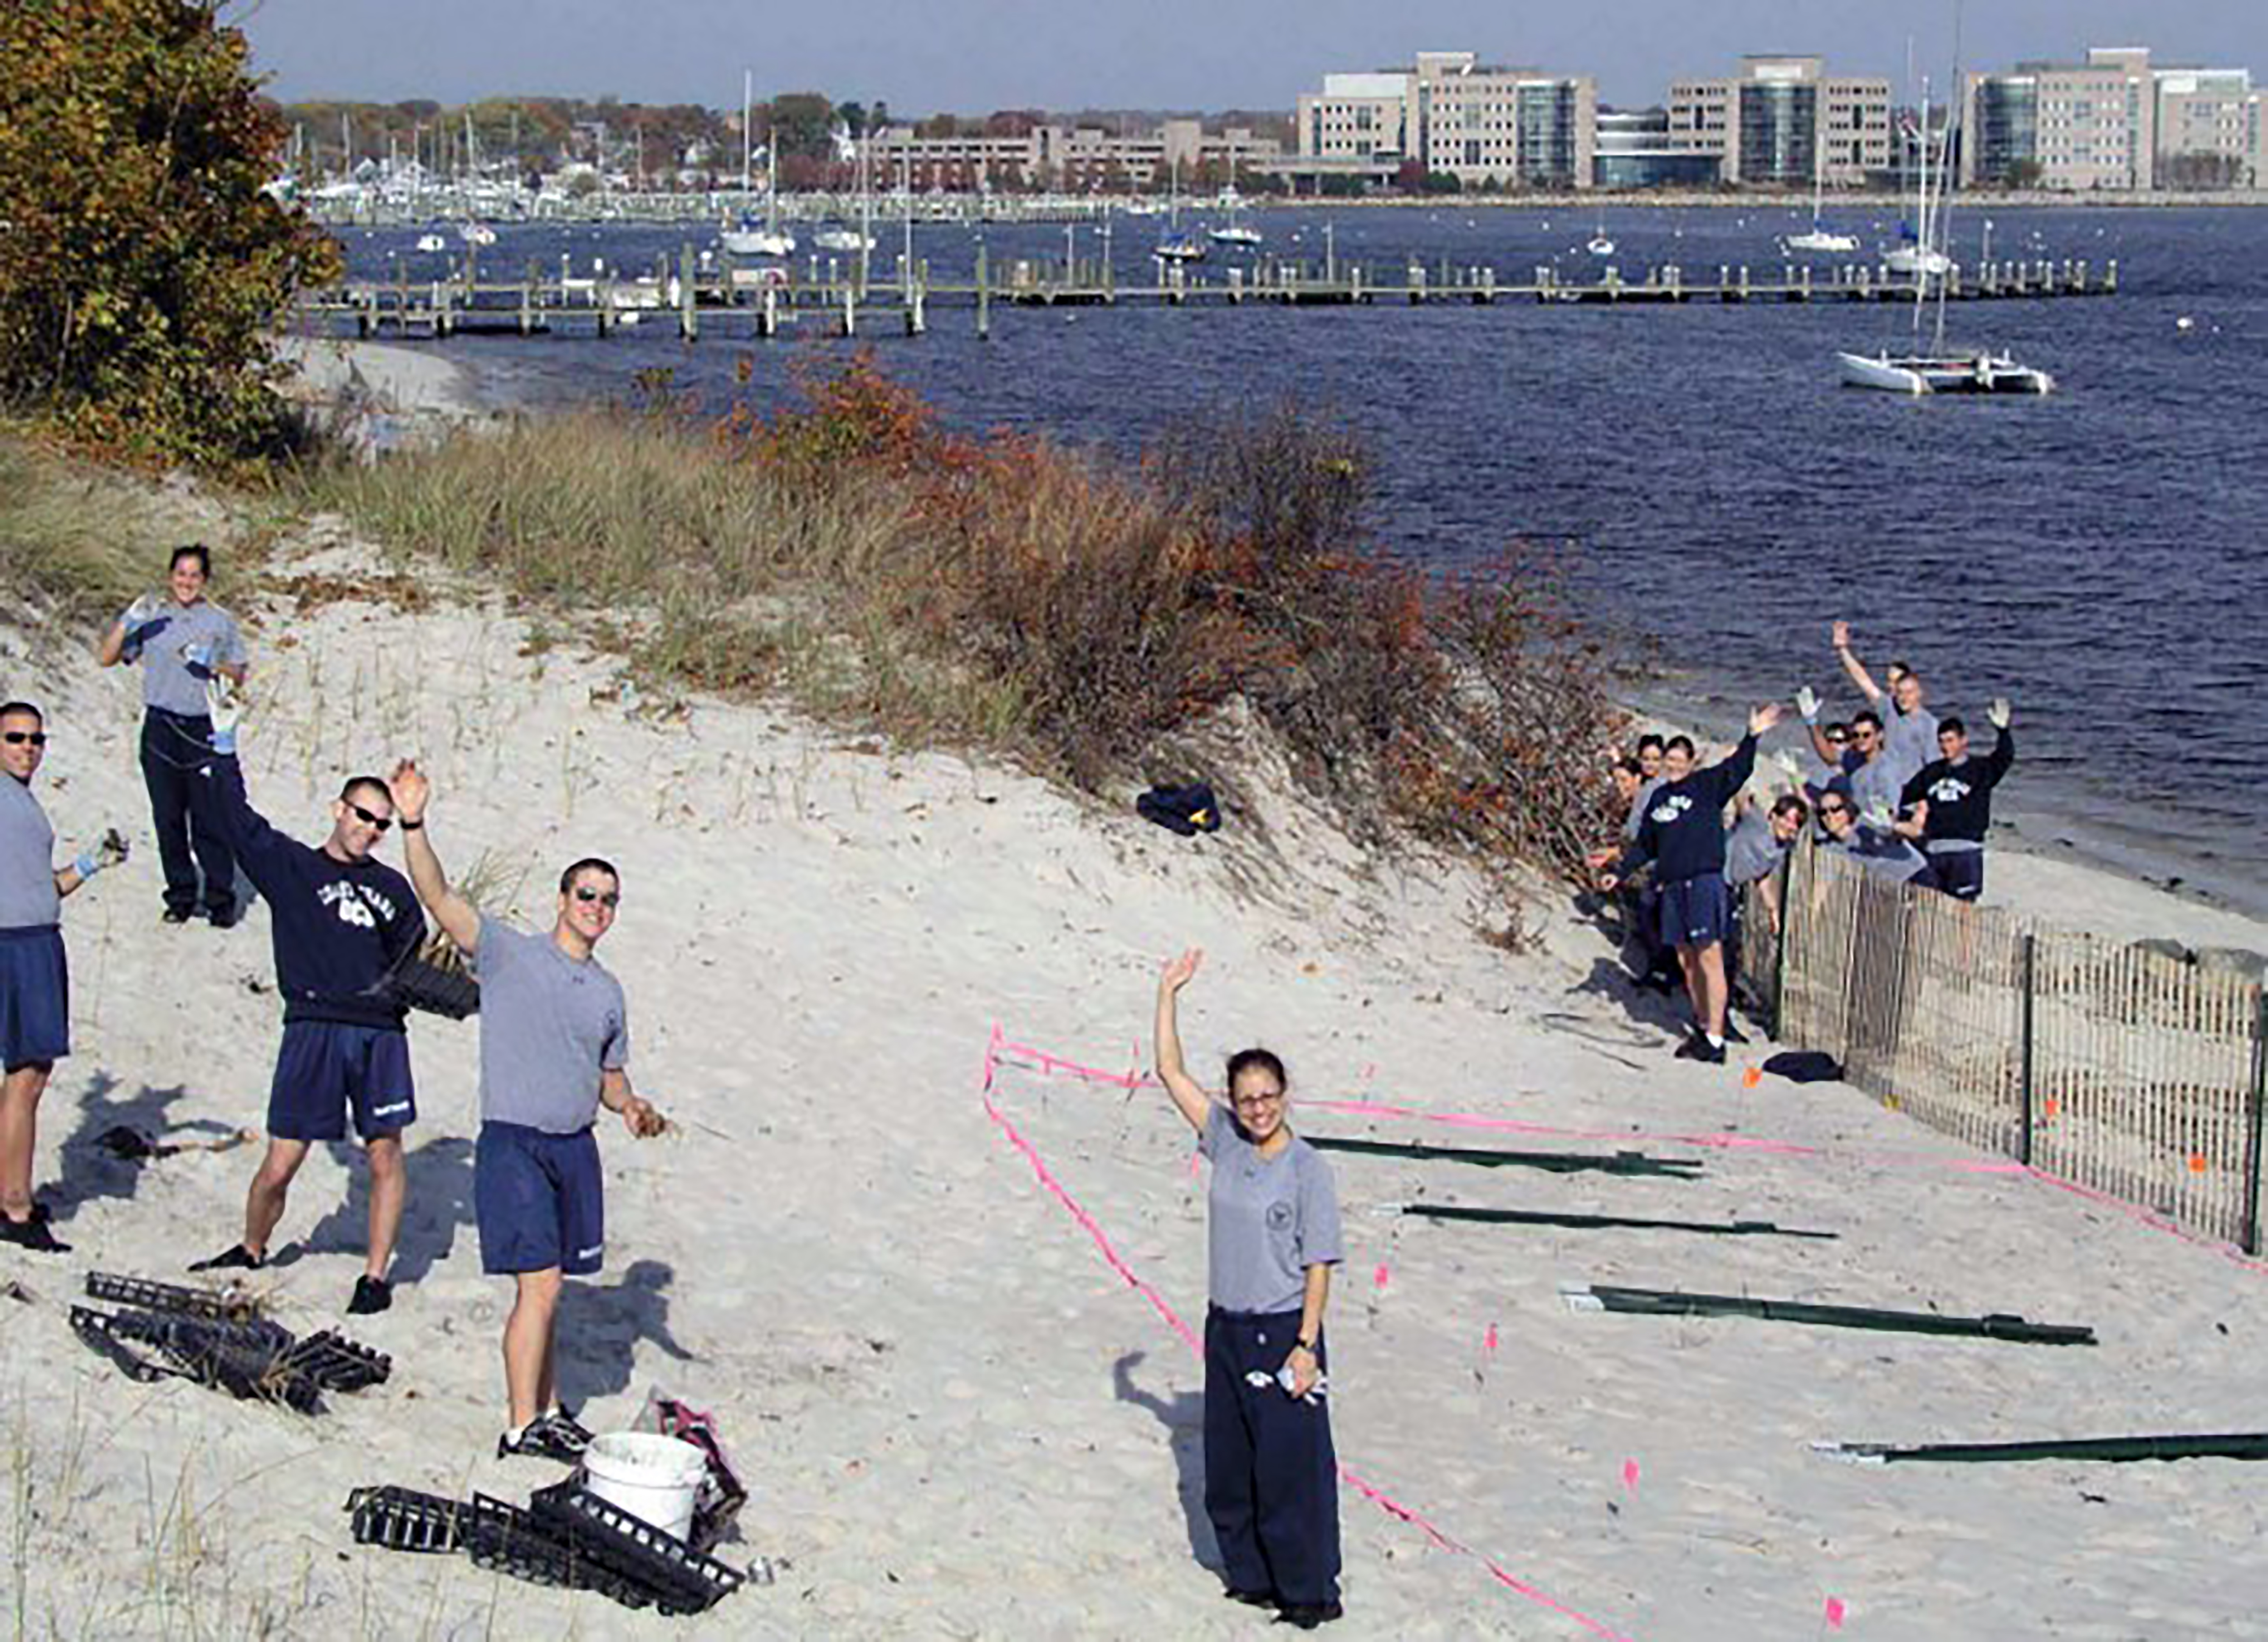 U.S. Coast Guard Academy volunteers standing and waving on sand dunes in New London, CT